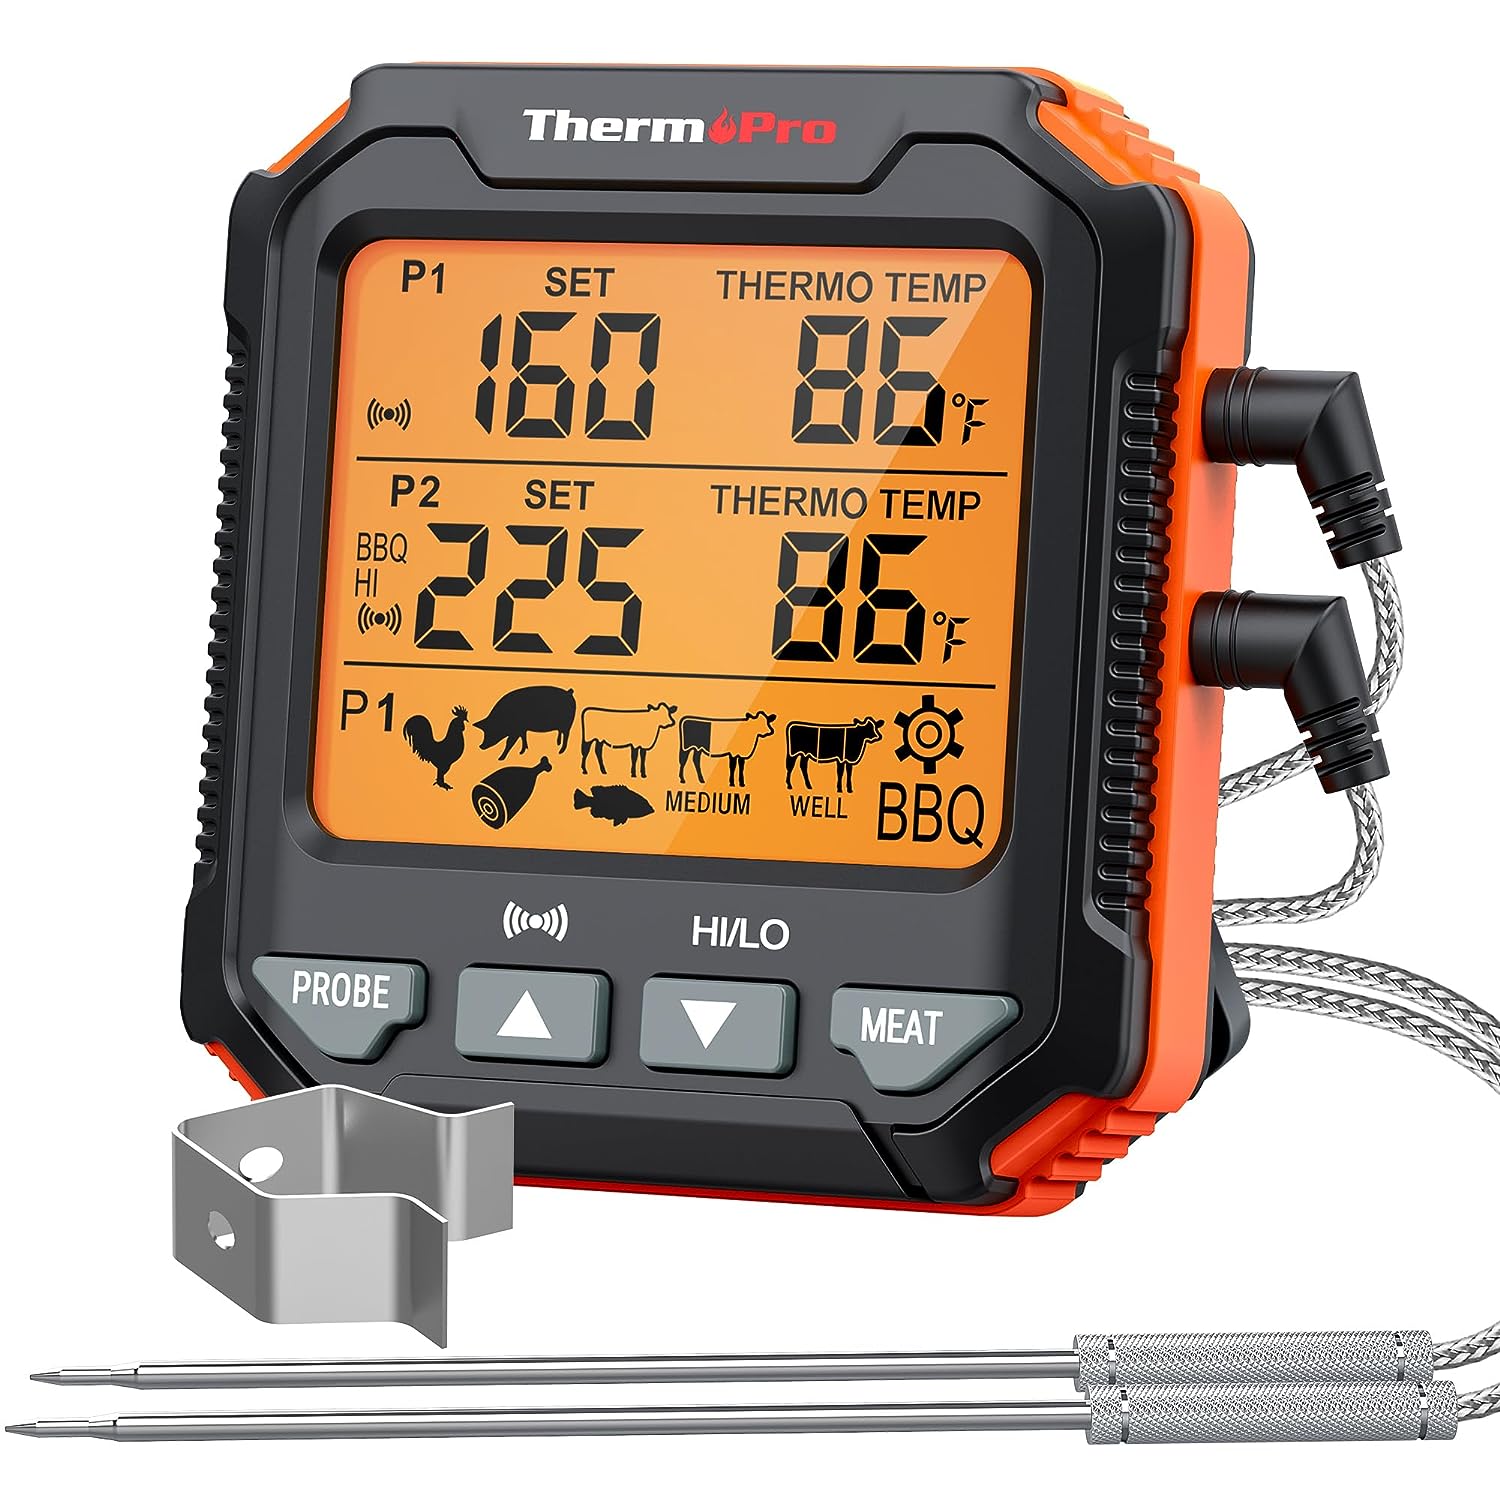 ThermoPro TP67 Review: Affordable But Unreliable